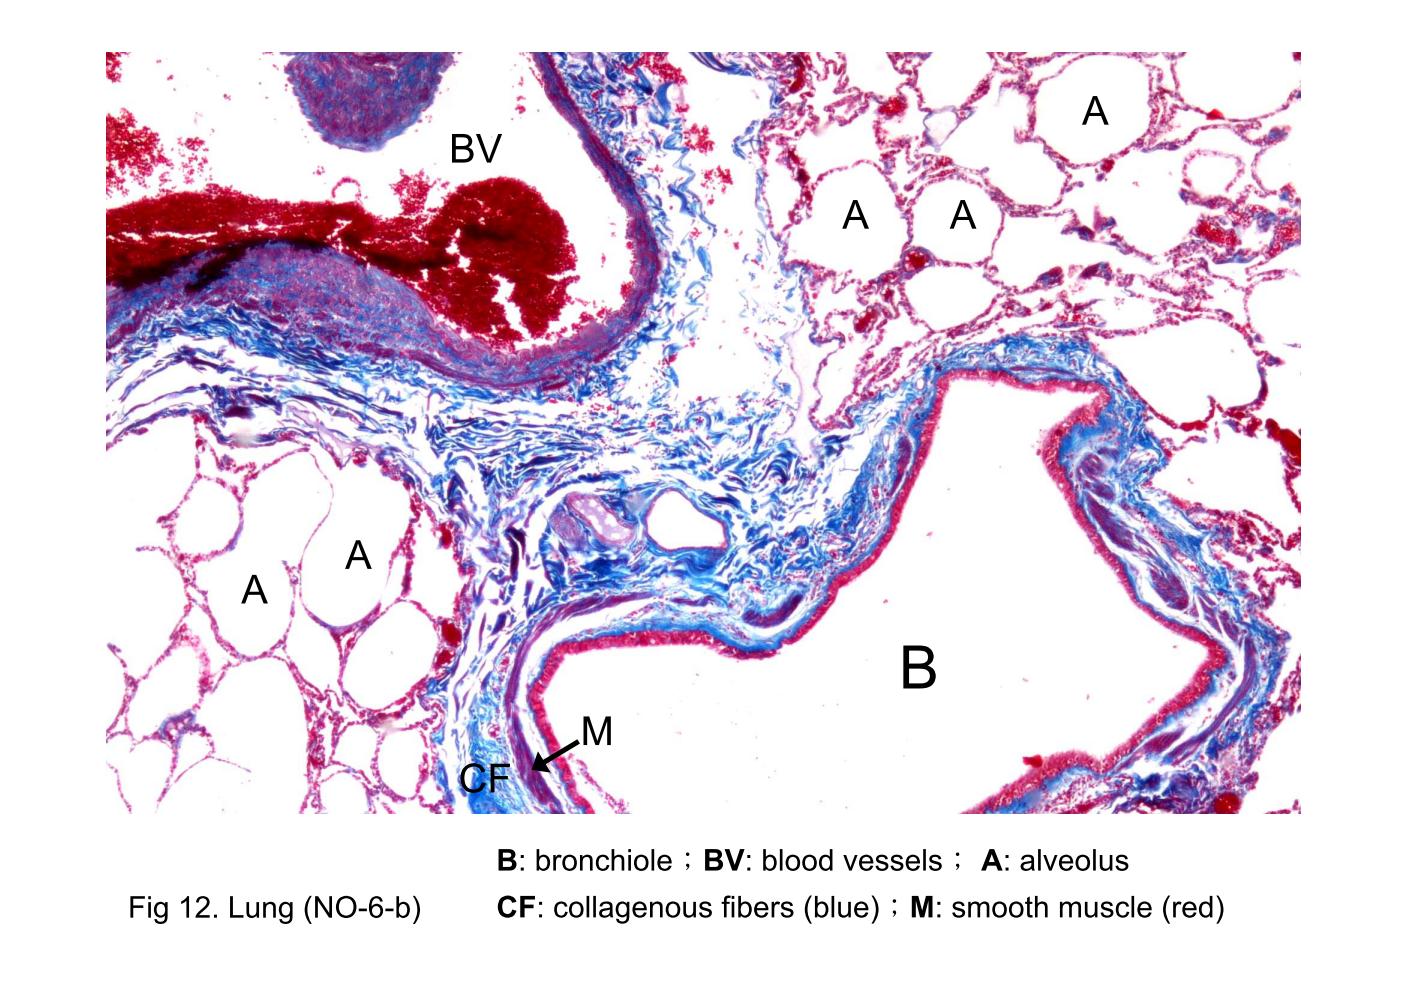 block9_26.jpg - Fig 12. Lung (NO-6-b)A typical bronchiole is shown here. Blood vessels (BV) are adjacent to the bronchiole. The main features of the bronchiolar wall evident in the figure are bundles of smooth muscle (M) and the lining epithelium. The connective tissue is minimal and, at this low magnification, not conspicuous. Nevertheless, the connective tissue is present and separates the muscle into bundles. The connective tissue contains collagenous fibers (CF). Glands are not present in the wall of the bronchiole. Surrounding the bronchiole, are the air spaces or alveoli (A) of the lung.